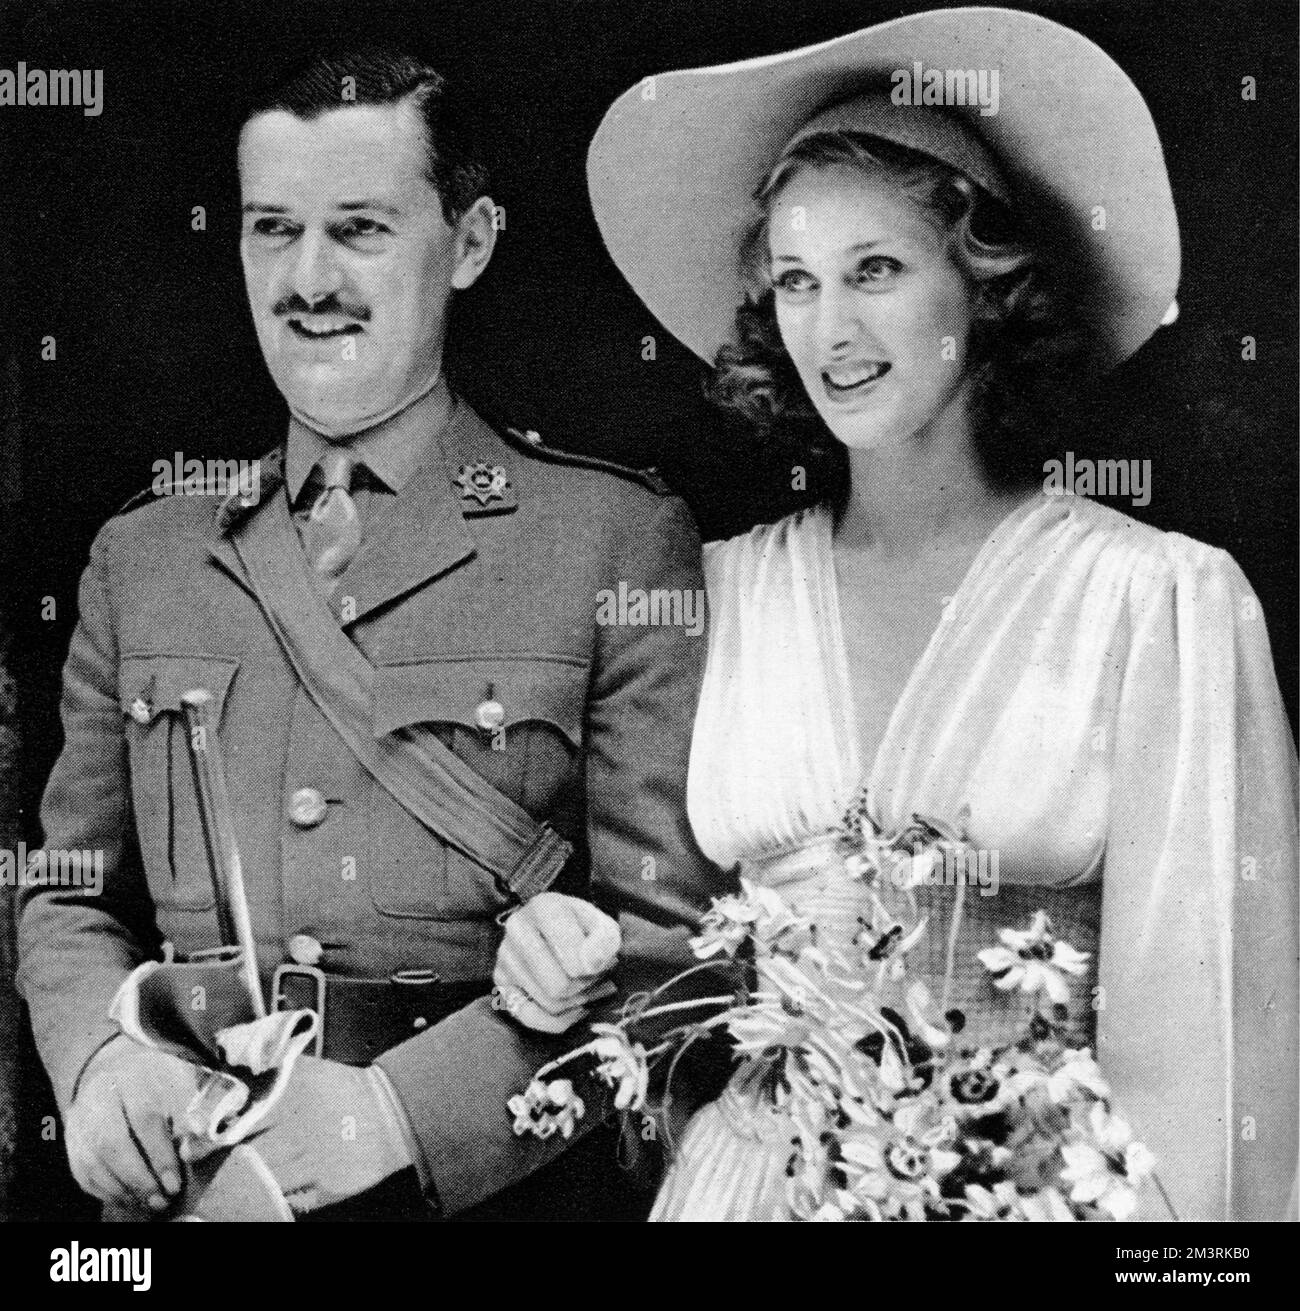 British actor Hugh Williams and Australian stage and screen actress Margaret Vyner photographed on their wedding day.   1940 Stock Photo